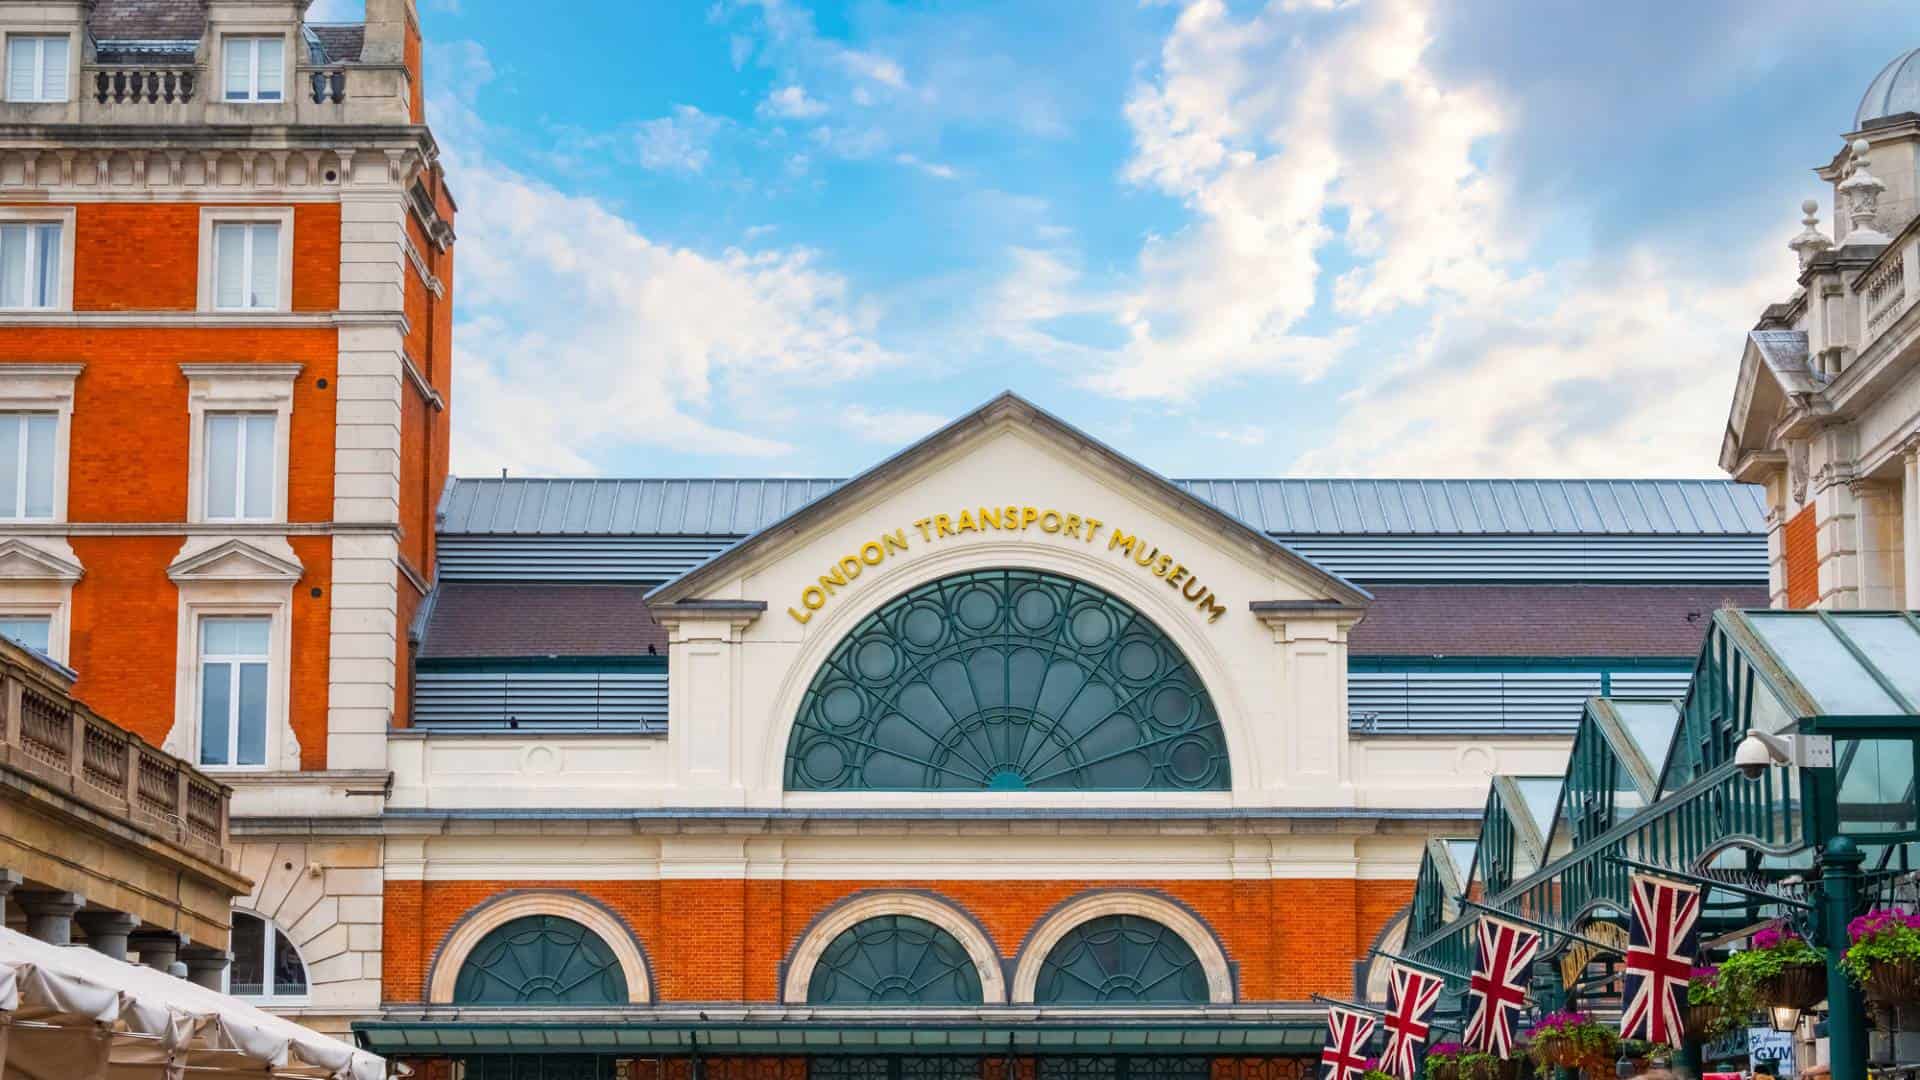 Where are the best train museums in Europe located?